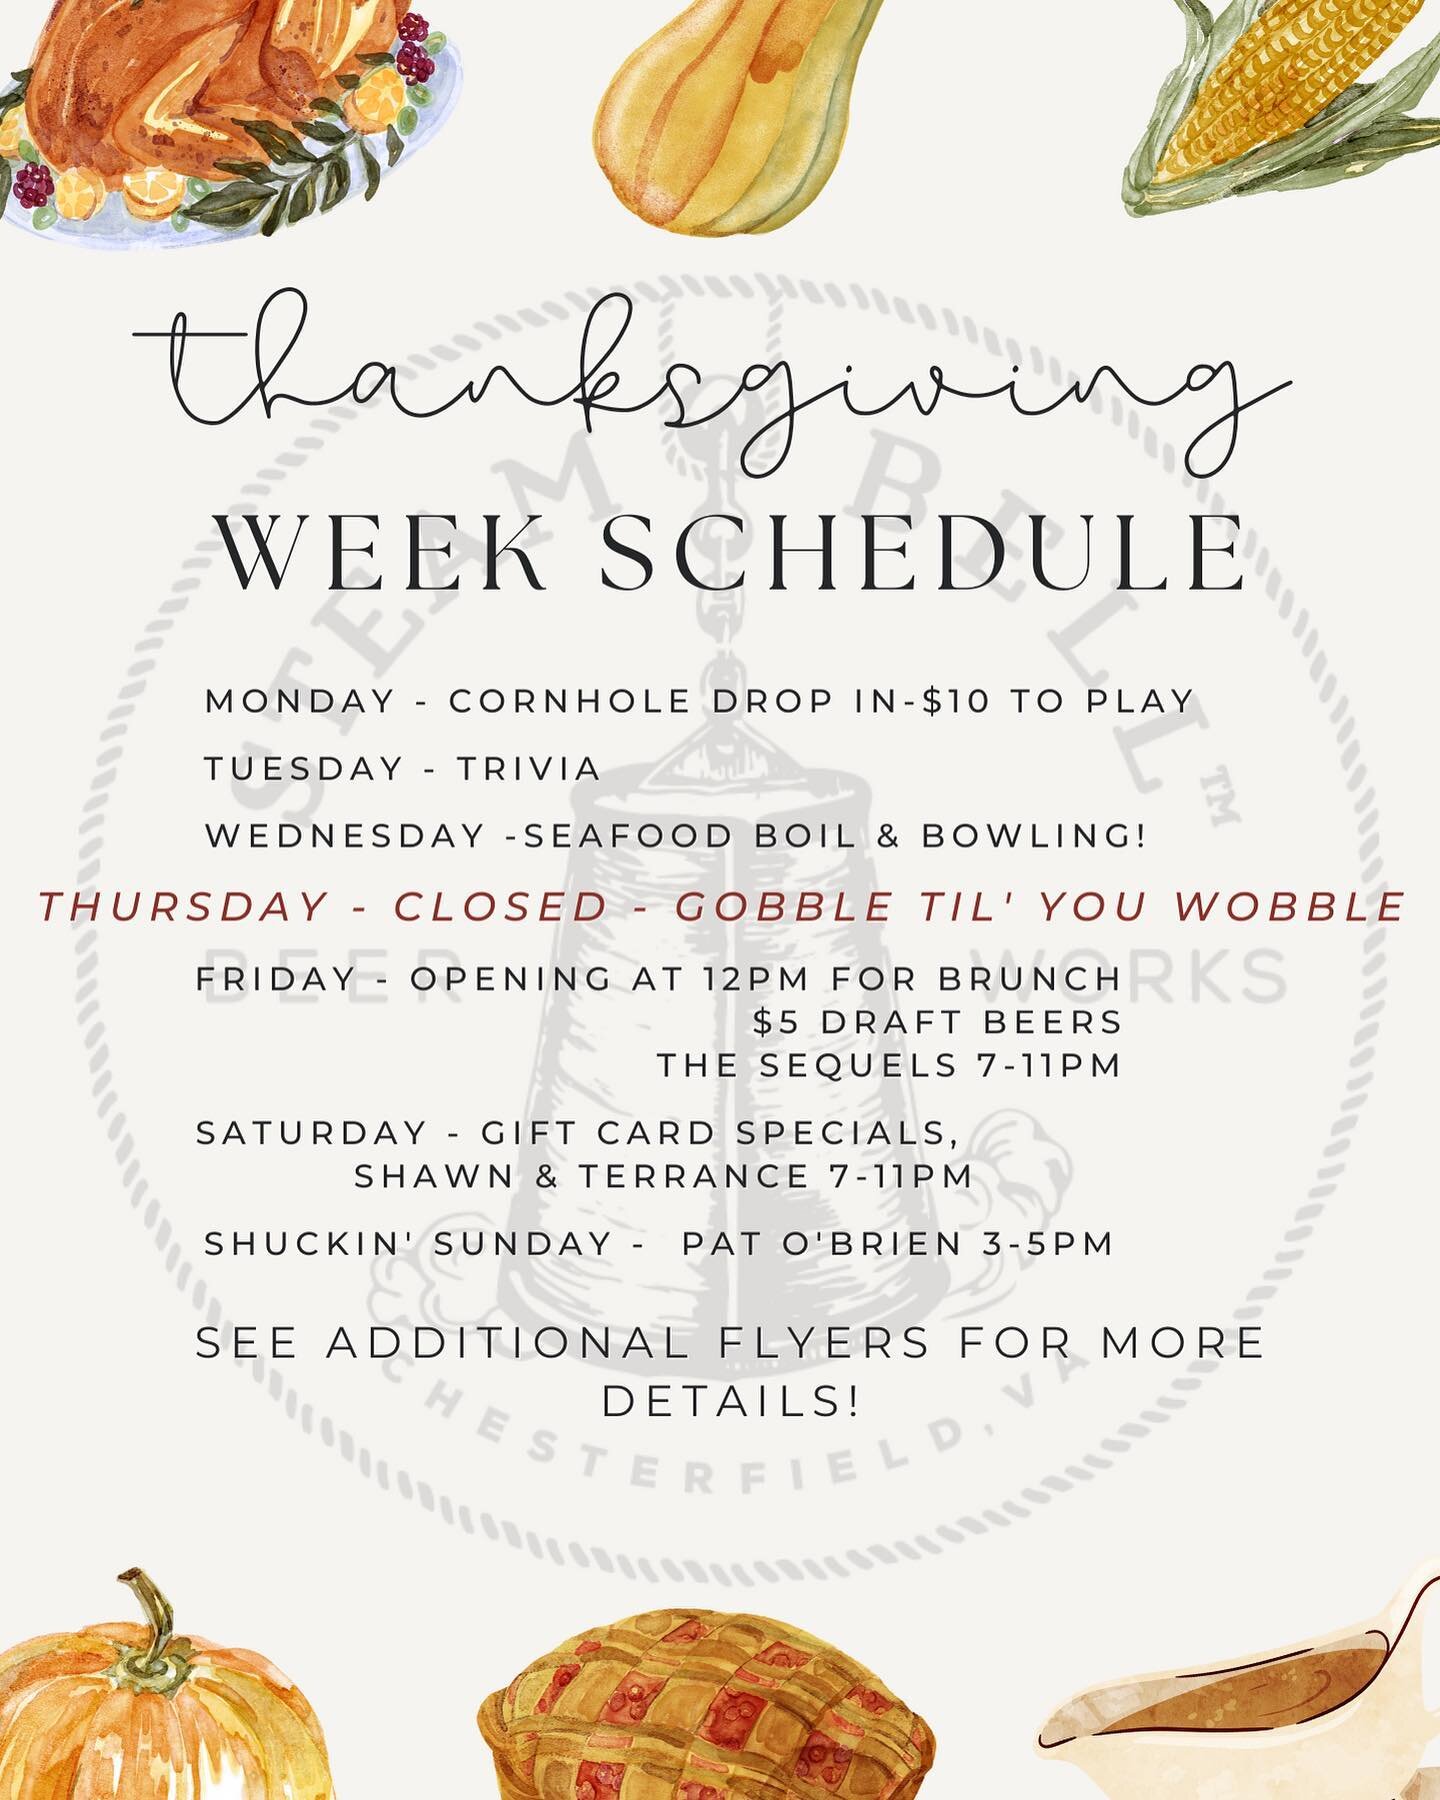 We have a busy week ahead here at Steam Bell and we hope you&rsquo;ll join us in all the fun! 
.
.
.
.
#rvabreweries #craftbeer #drinklocal #steambellbeerworks #rvabeertrail #beerme #gobbletillyouwobble #turkeybowling #megamimosas #brunch #beerandtun